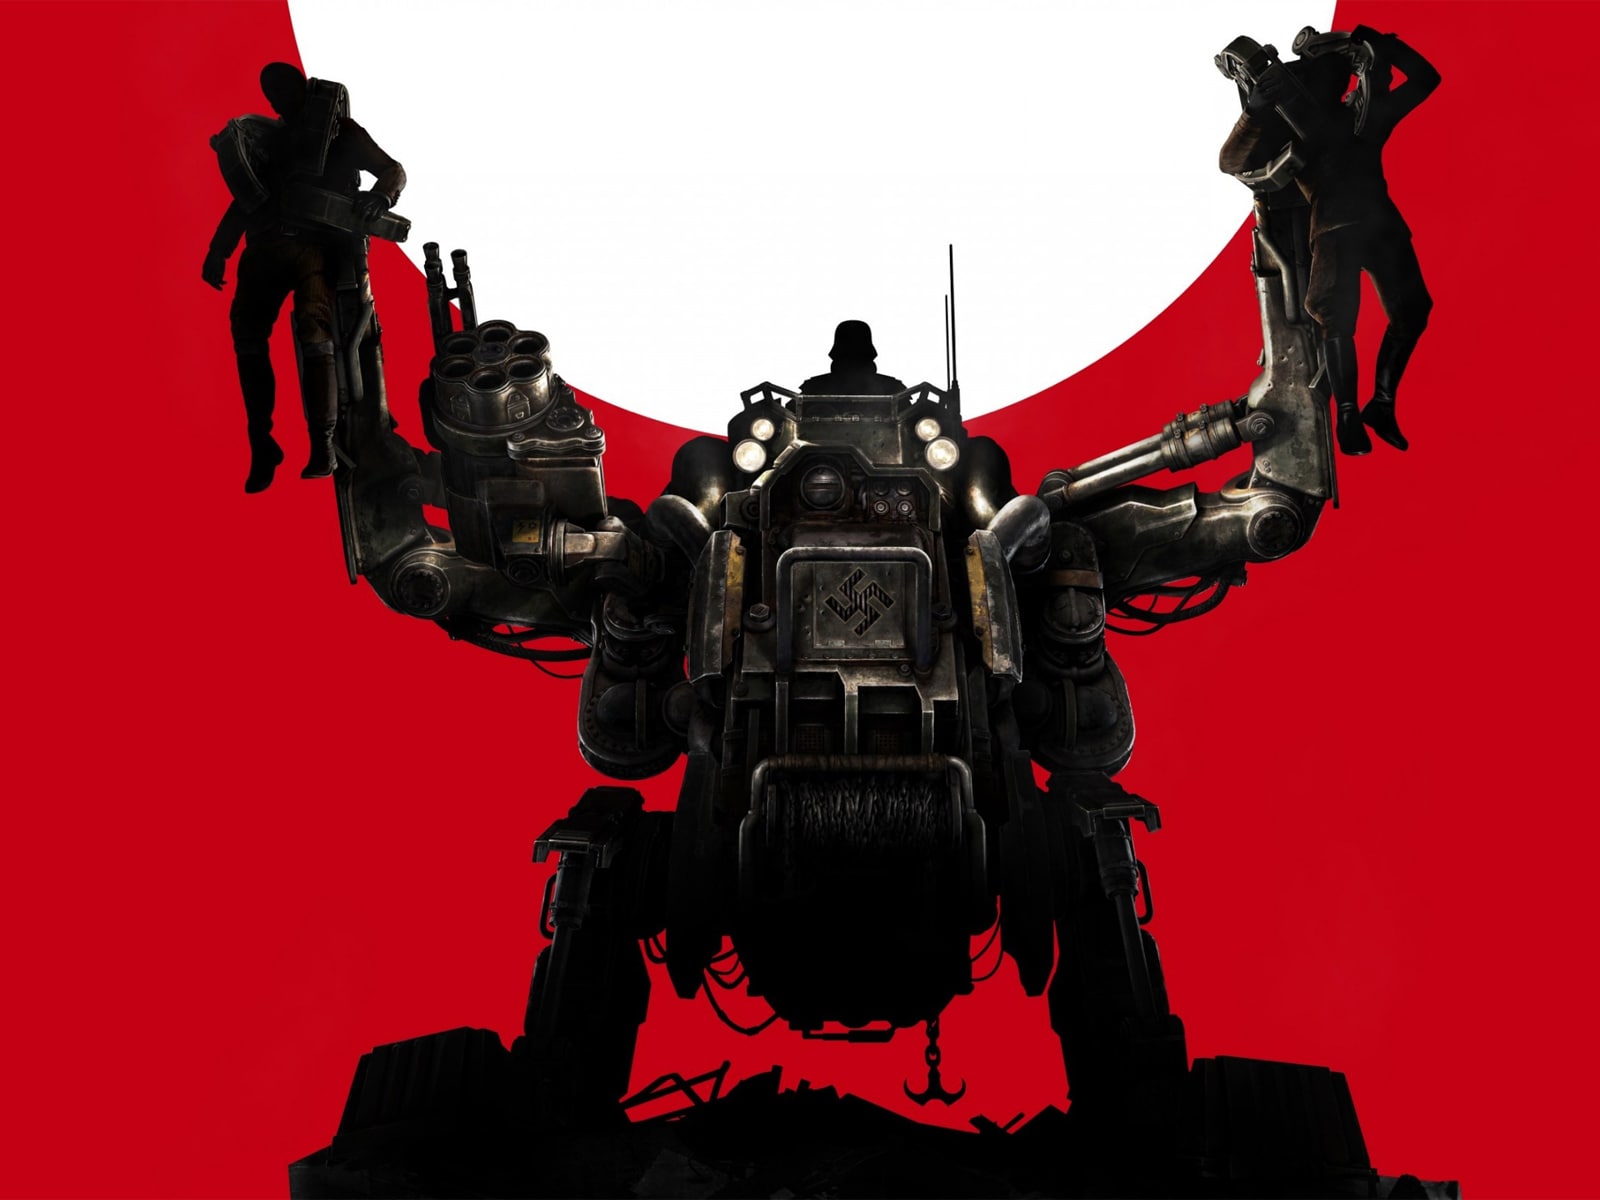 Wolfenstein: The New Order Cheats and Codes for Playstation 3